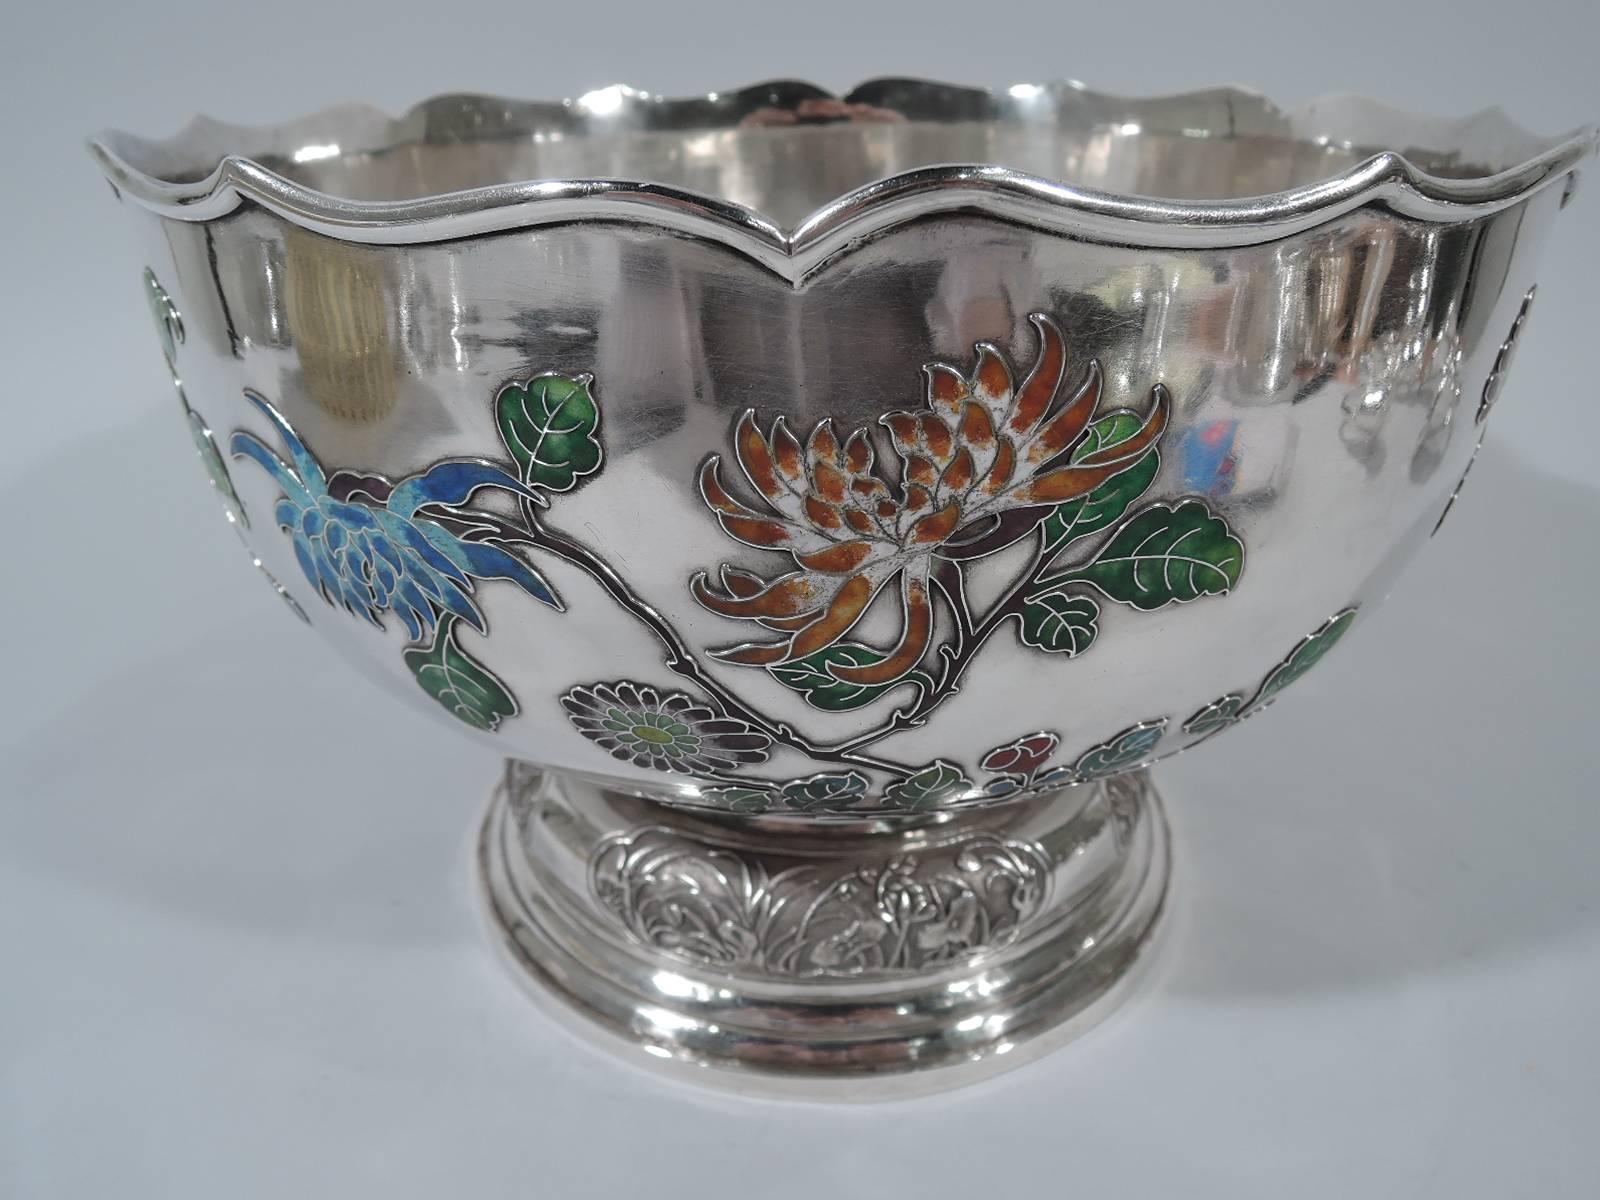 Chinese Export Very Fine Chinese Silver and Enamel Centrepiece Bowl by Wang Hing